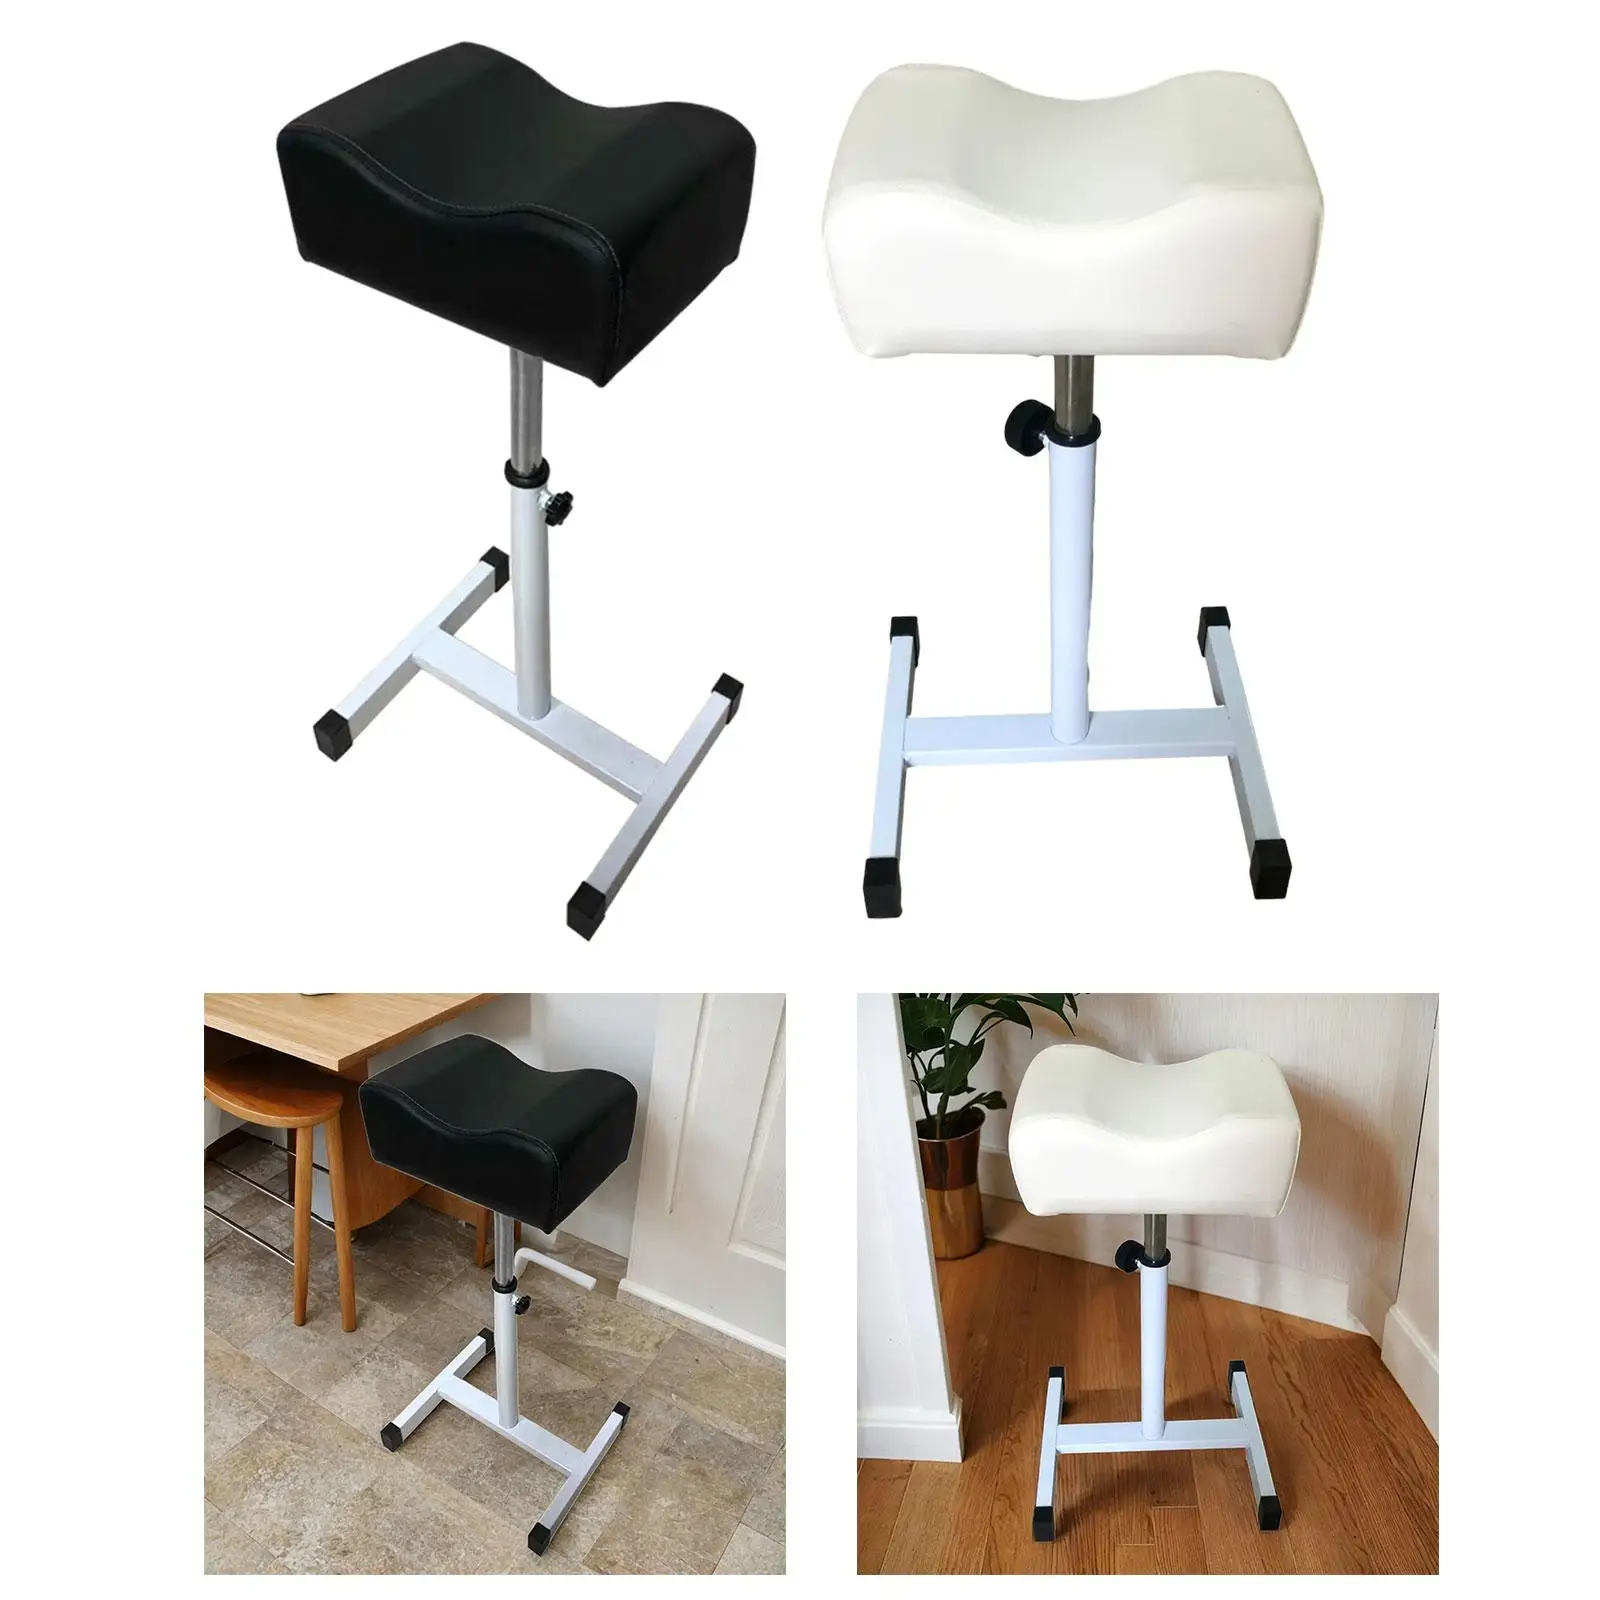 Pedicure Manicure Footrest Adjustable 49cm-69cm Anti Skid Foot Nail Beauty Stool Stand Foot Massage for SPA